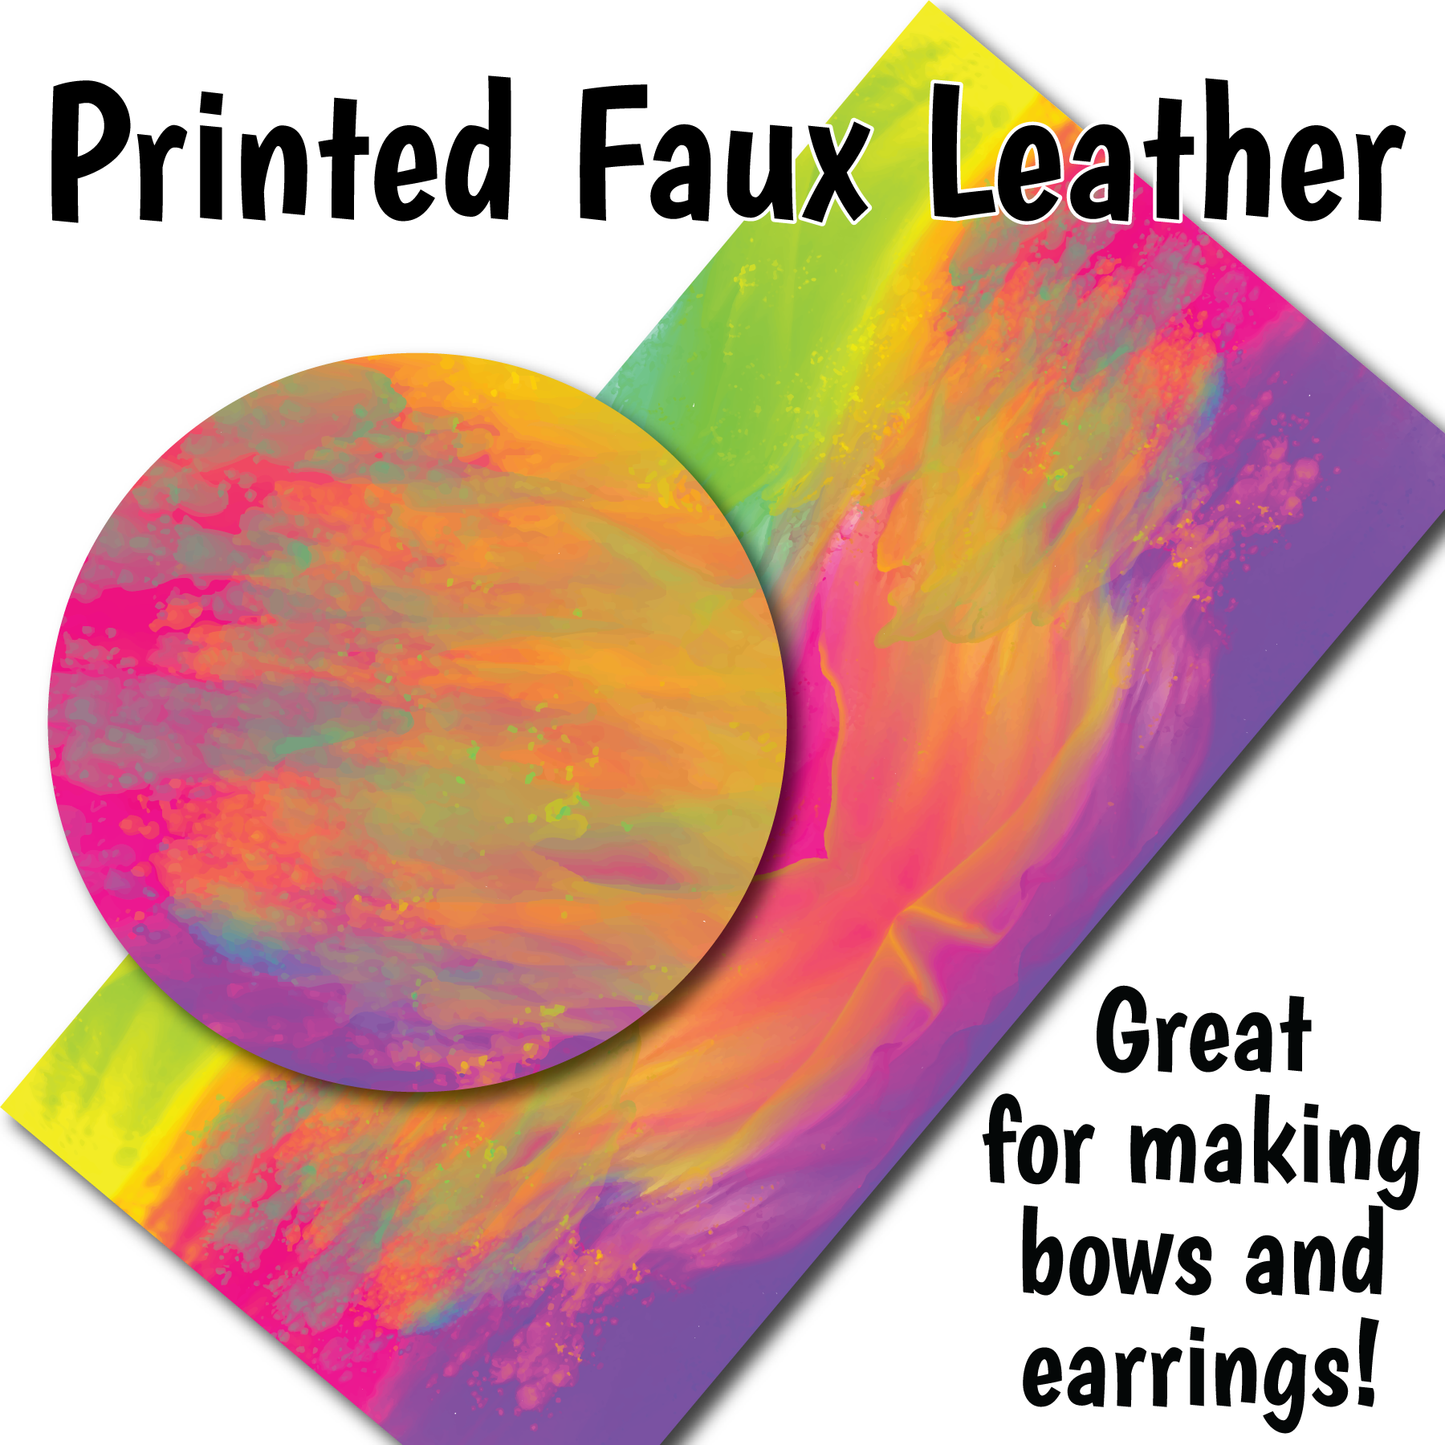 Abstract Paint I - Faux Leather Sheet (SHIPS IN 3 BUS DAYS)